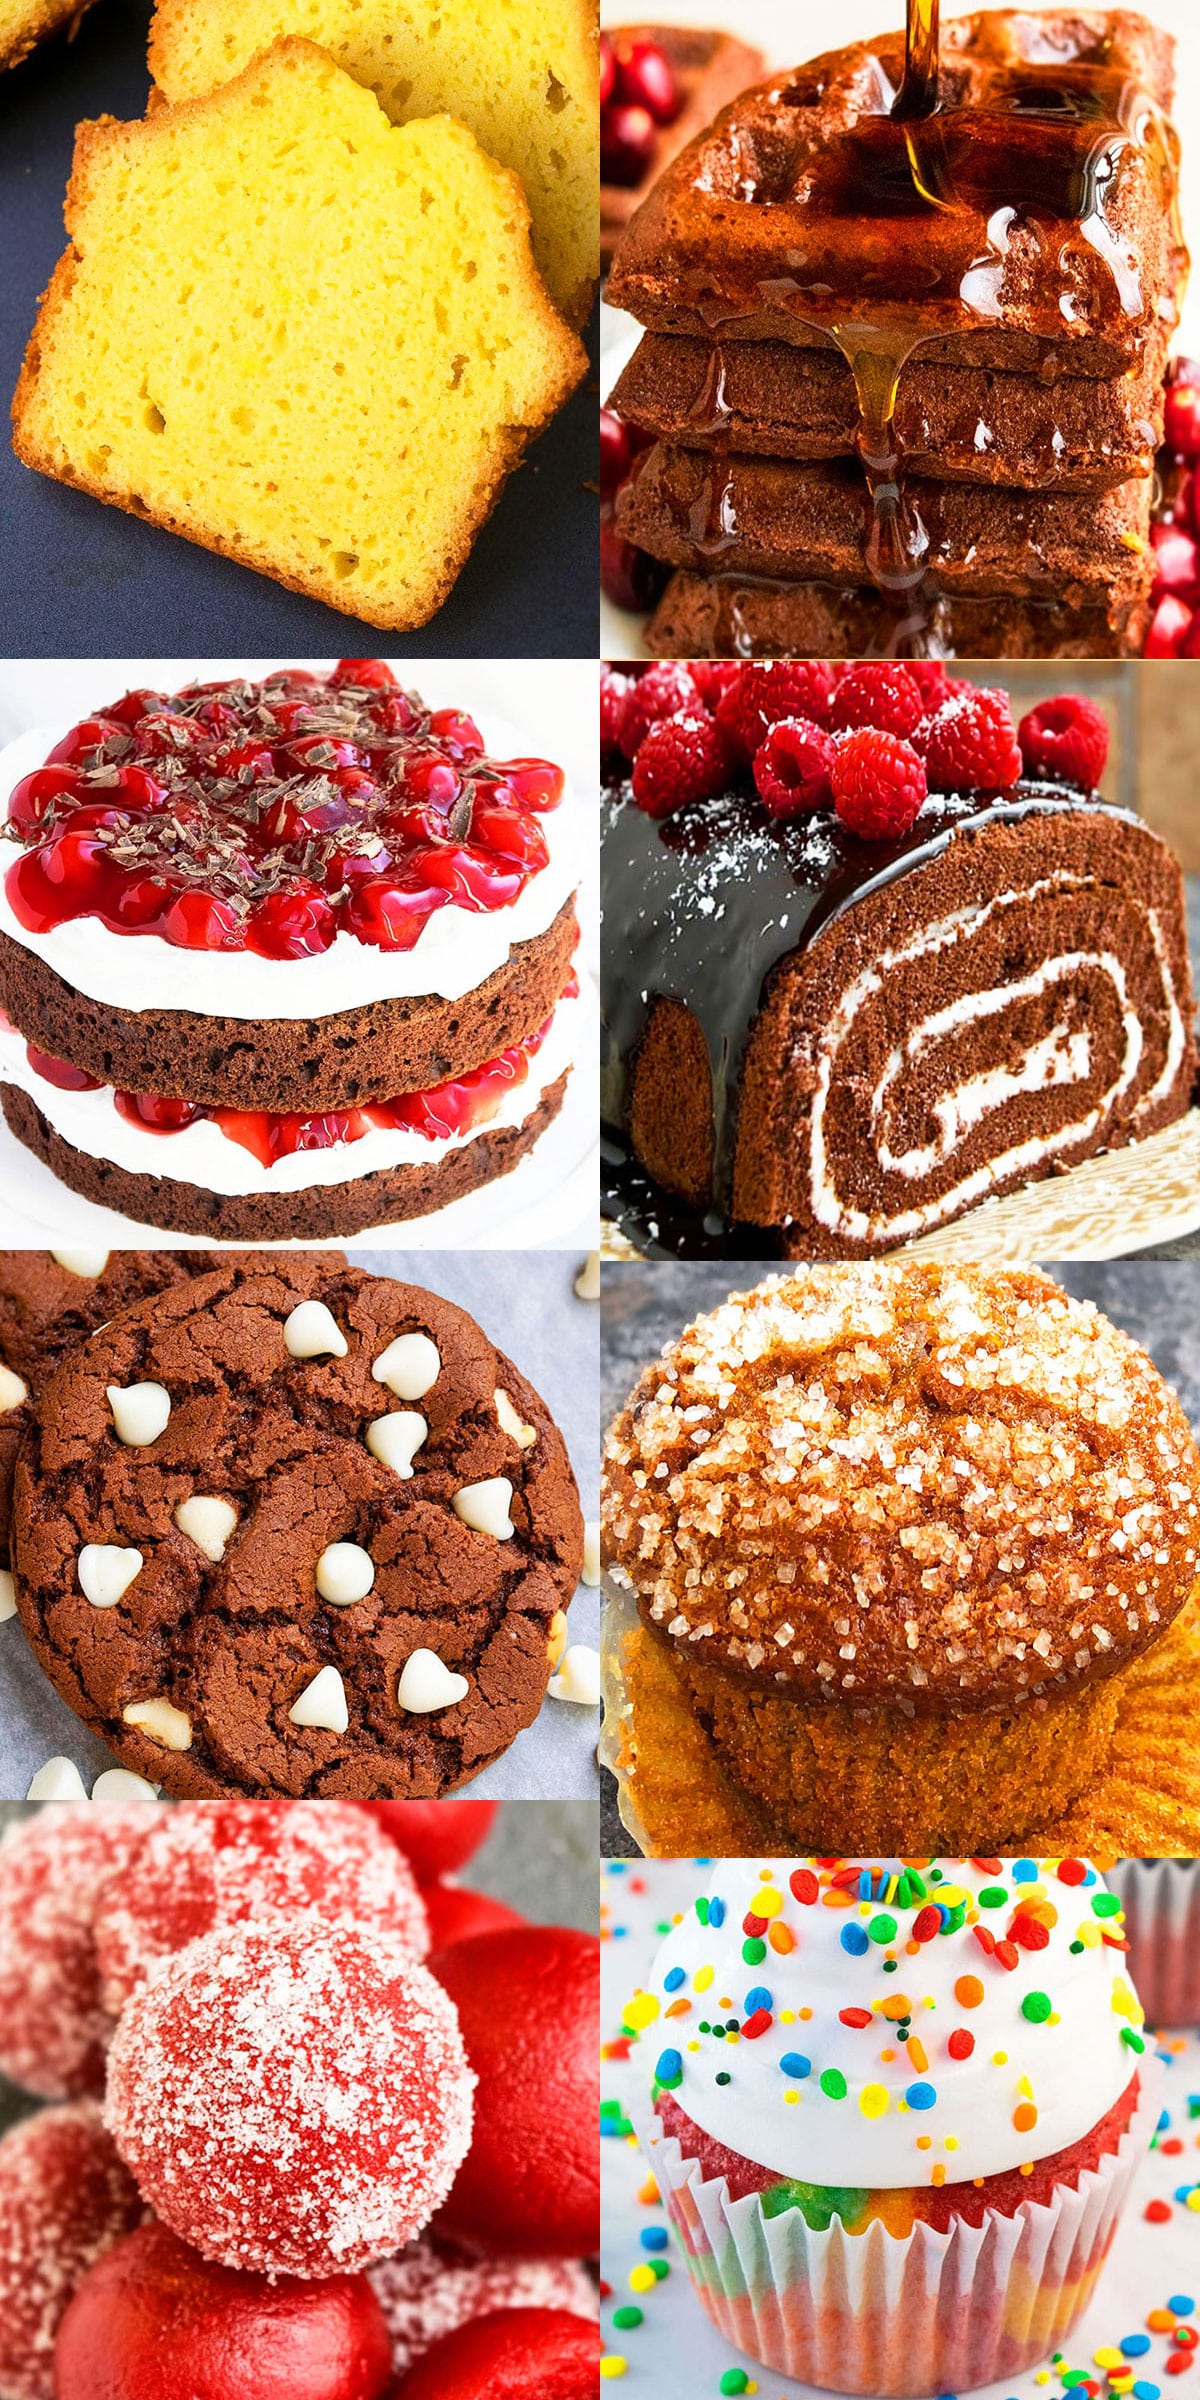 Collage Image With Many Easy Doctored Cake Mix Desserts (Cakes, Cupcakes, Cookies, Bread, Truffles, Donuts, Waffles)